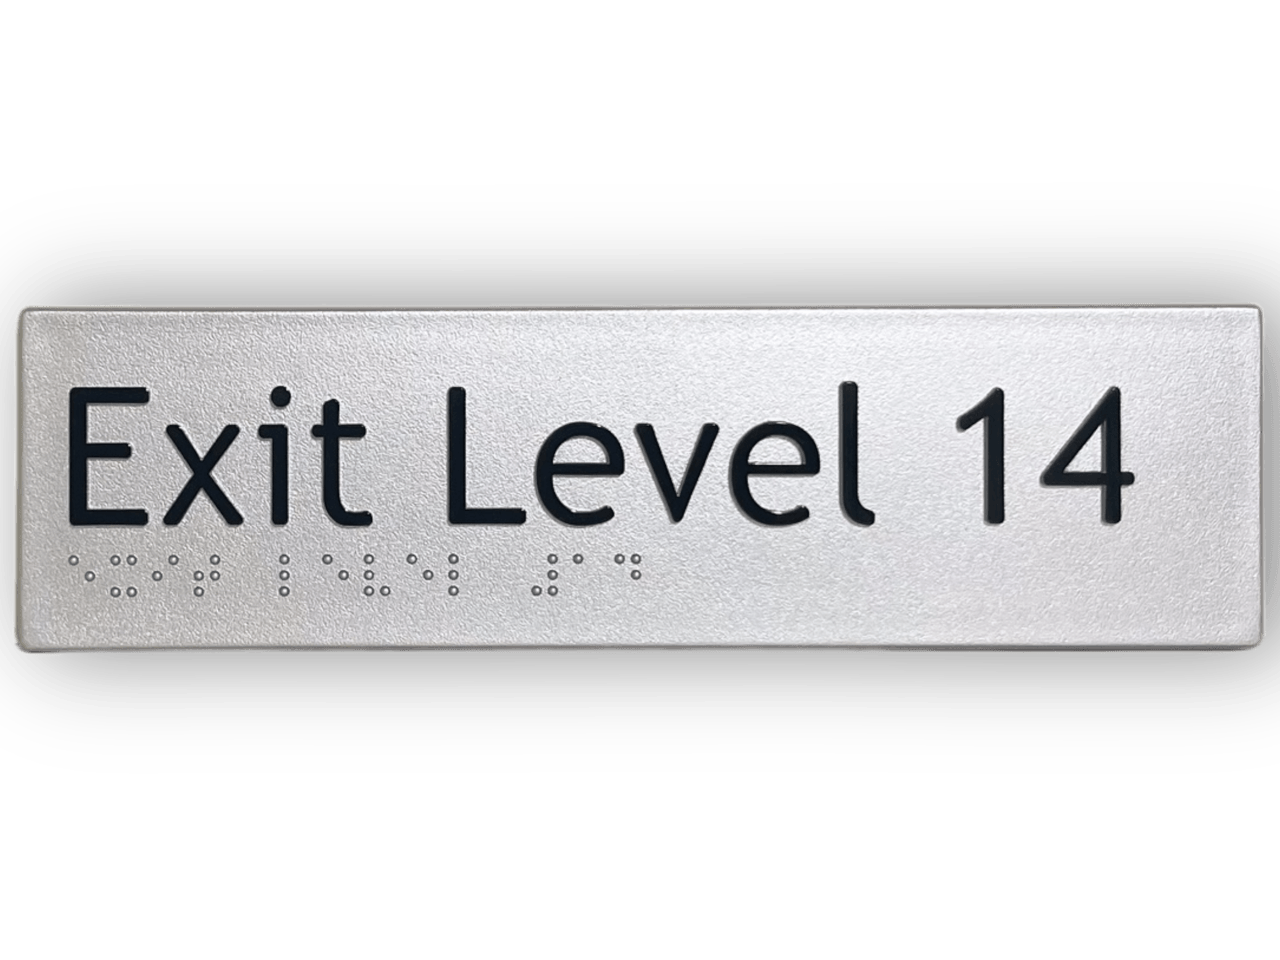 BRAILLE EXIT LEVEL 14 SIGN